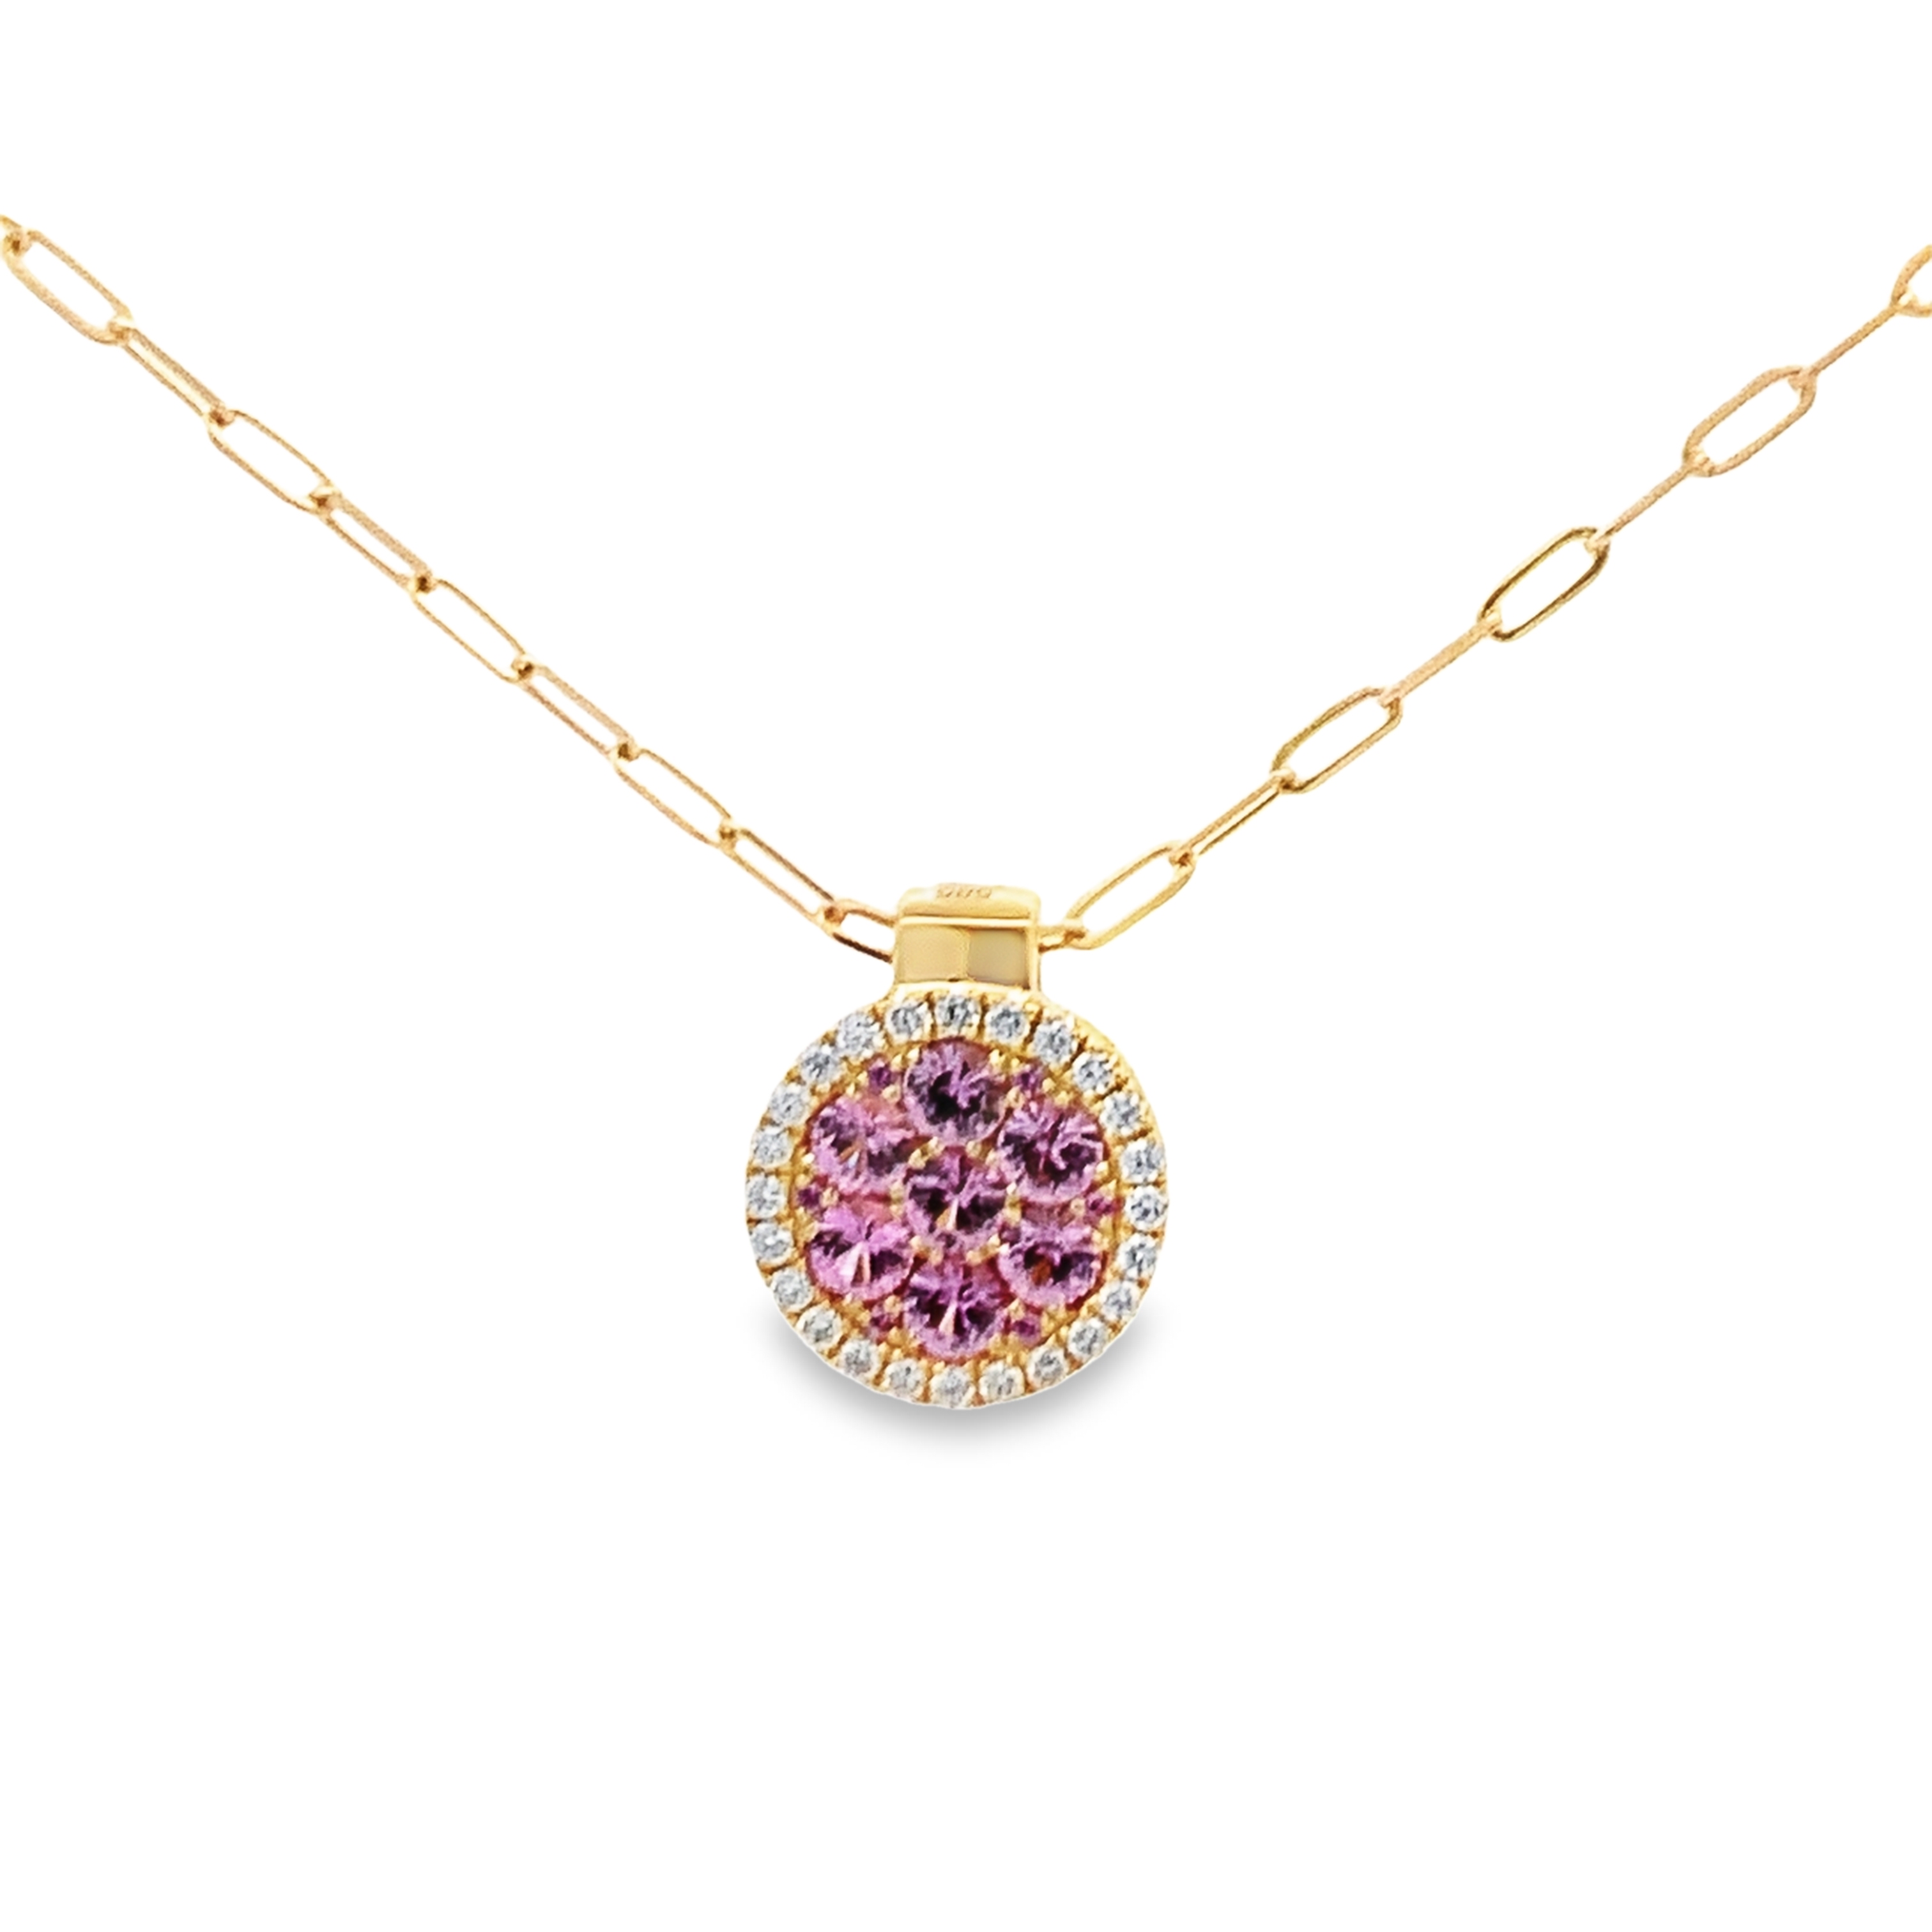 Frederic Sage 14K Yellow Gold Pink Sapphire Circle Pendant Necklace